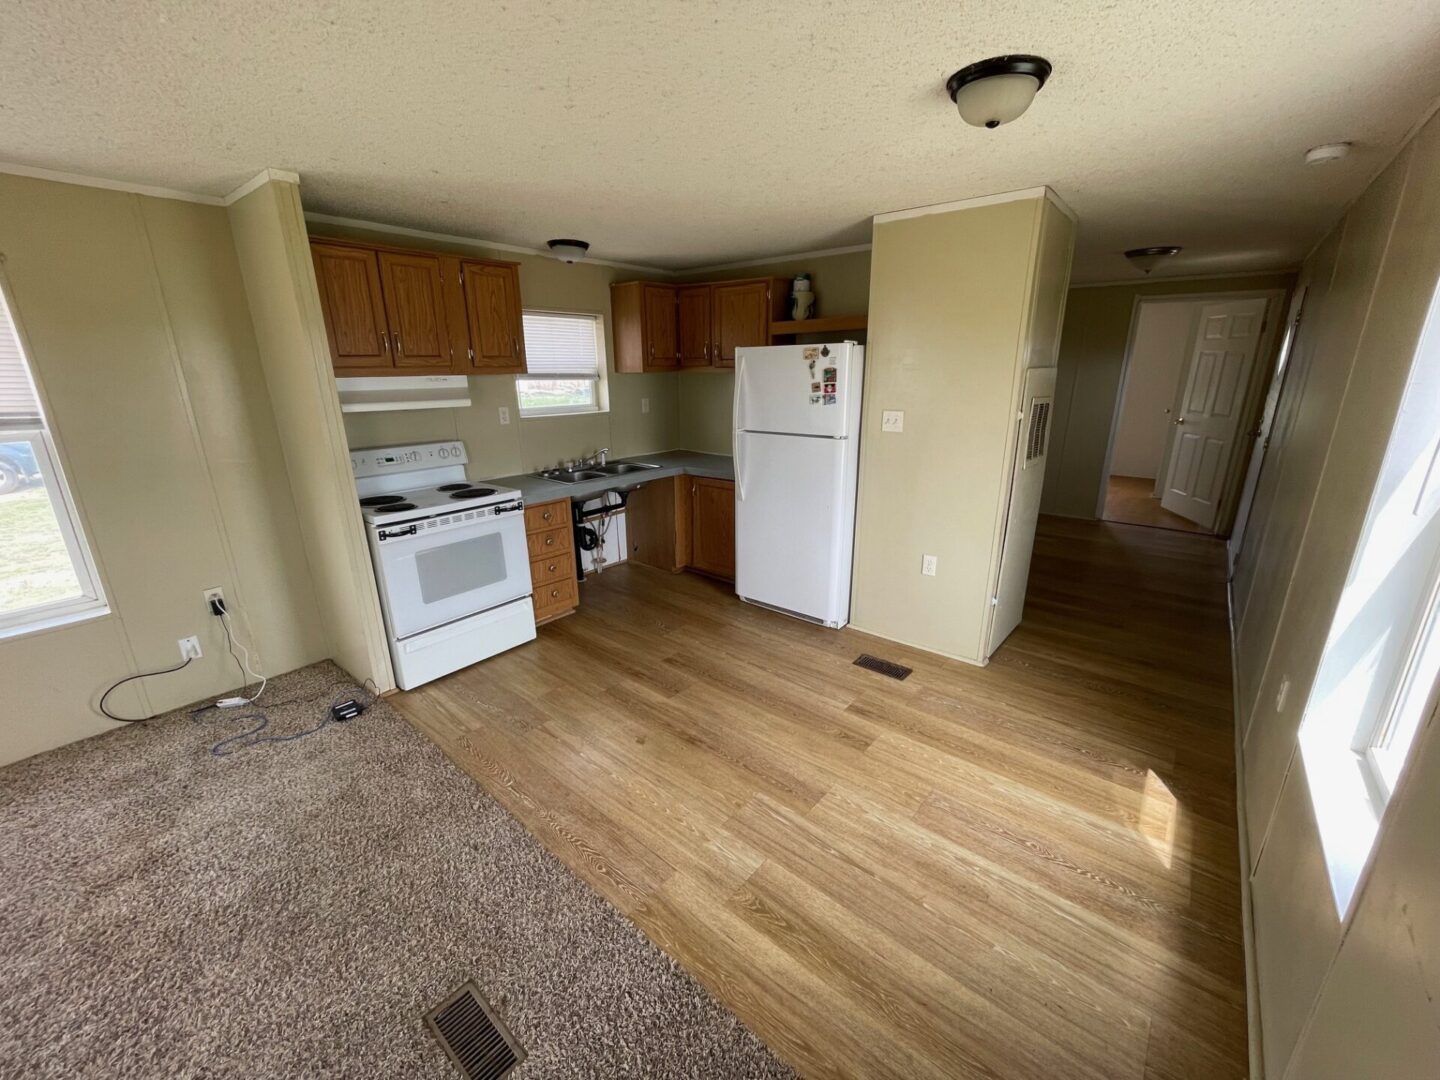 Kitchen and living area of a mobile home.